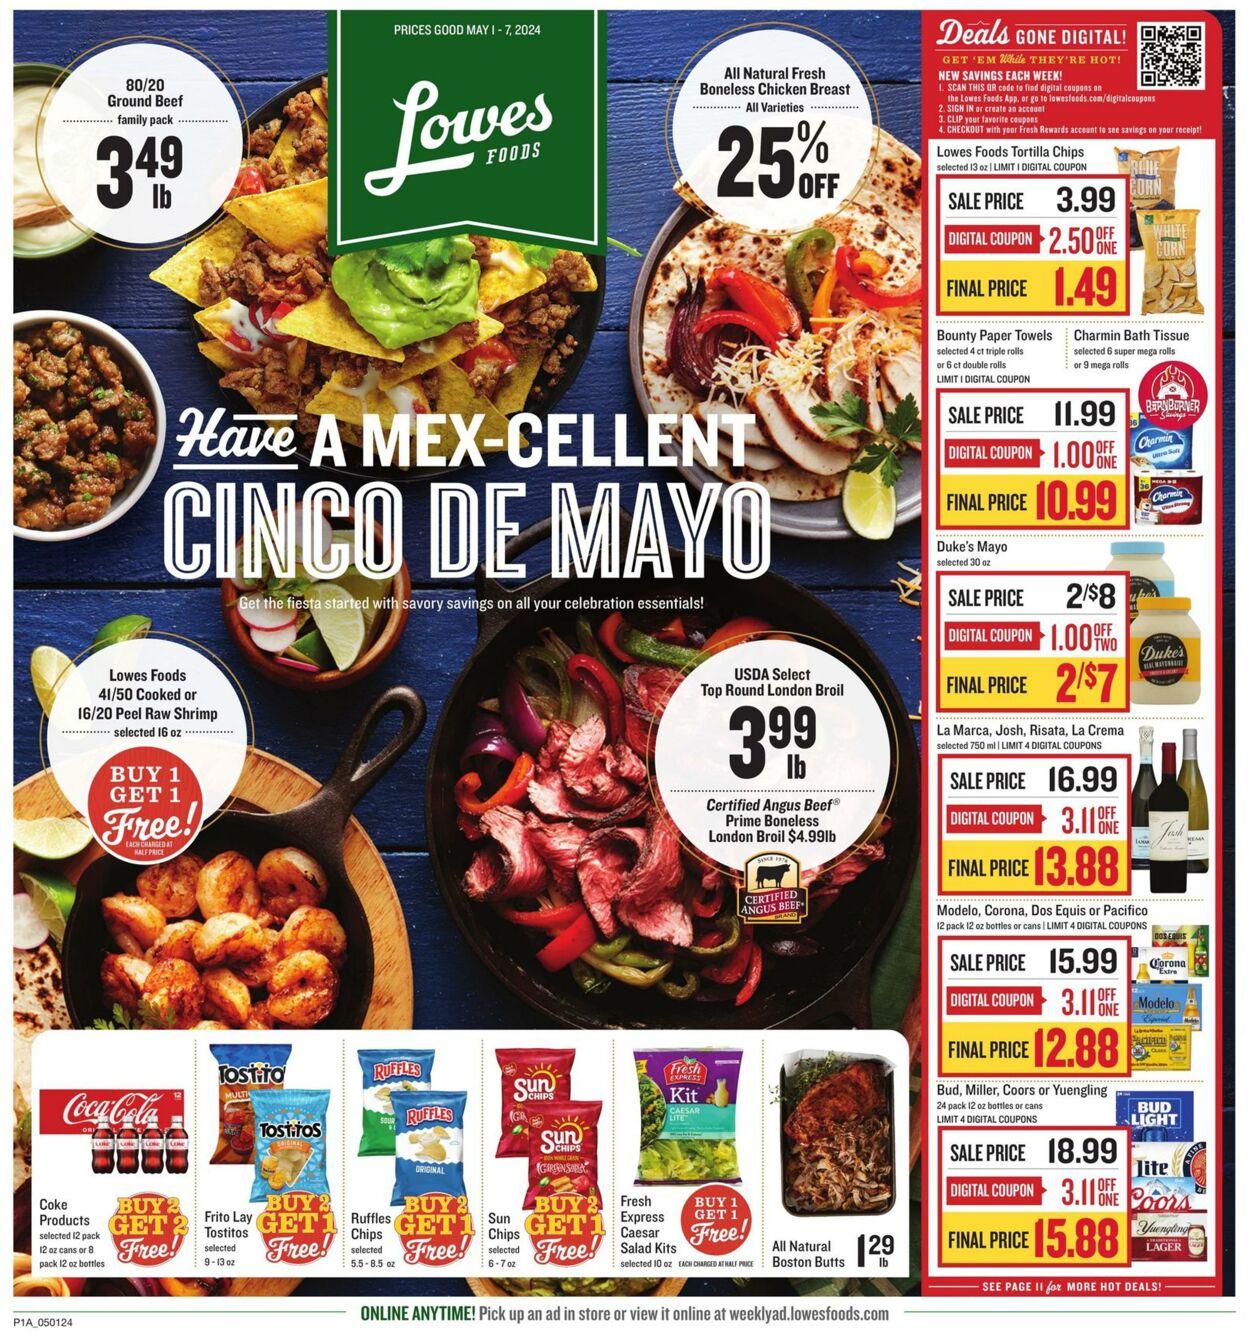 Lowes Foods Promotional weekly ads